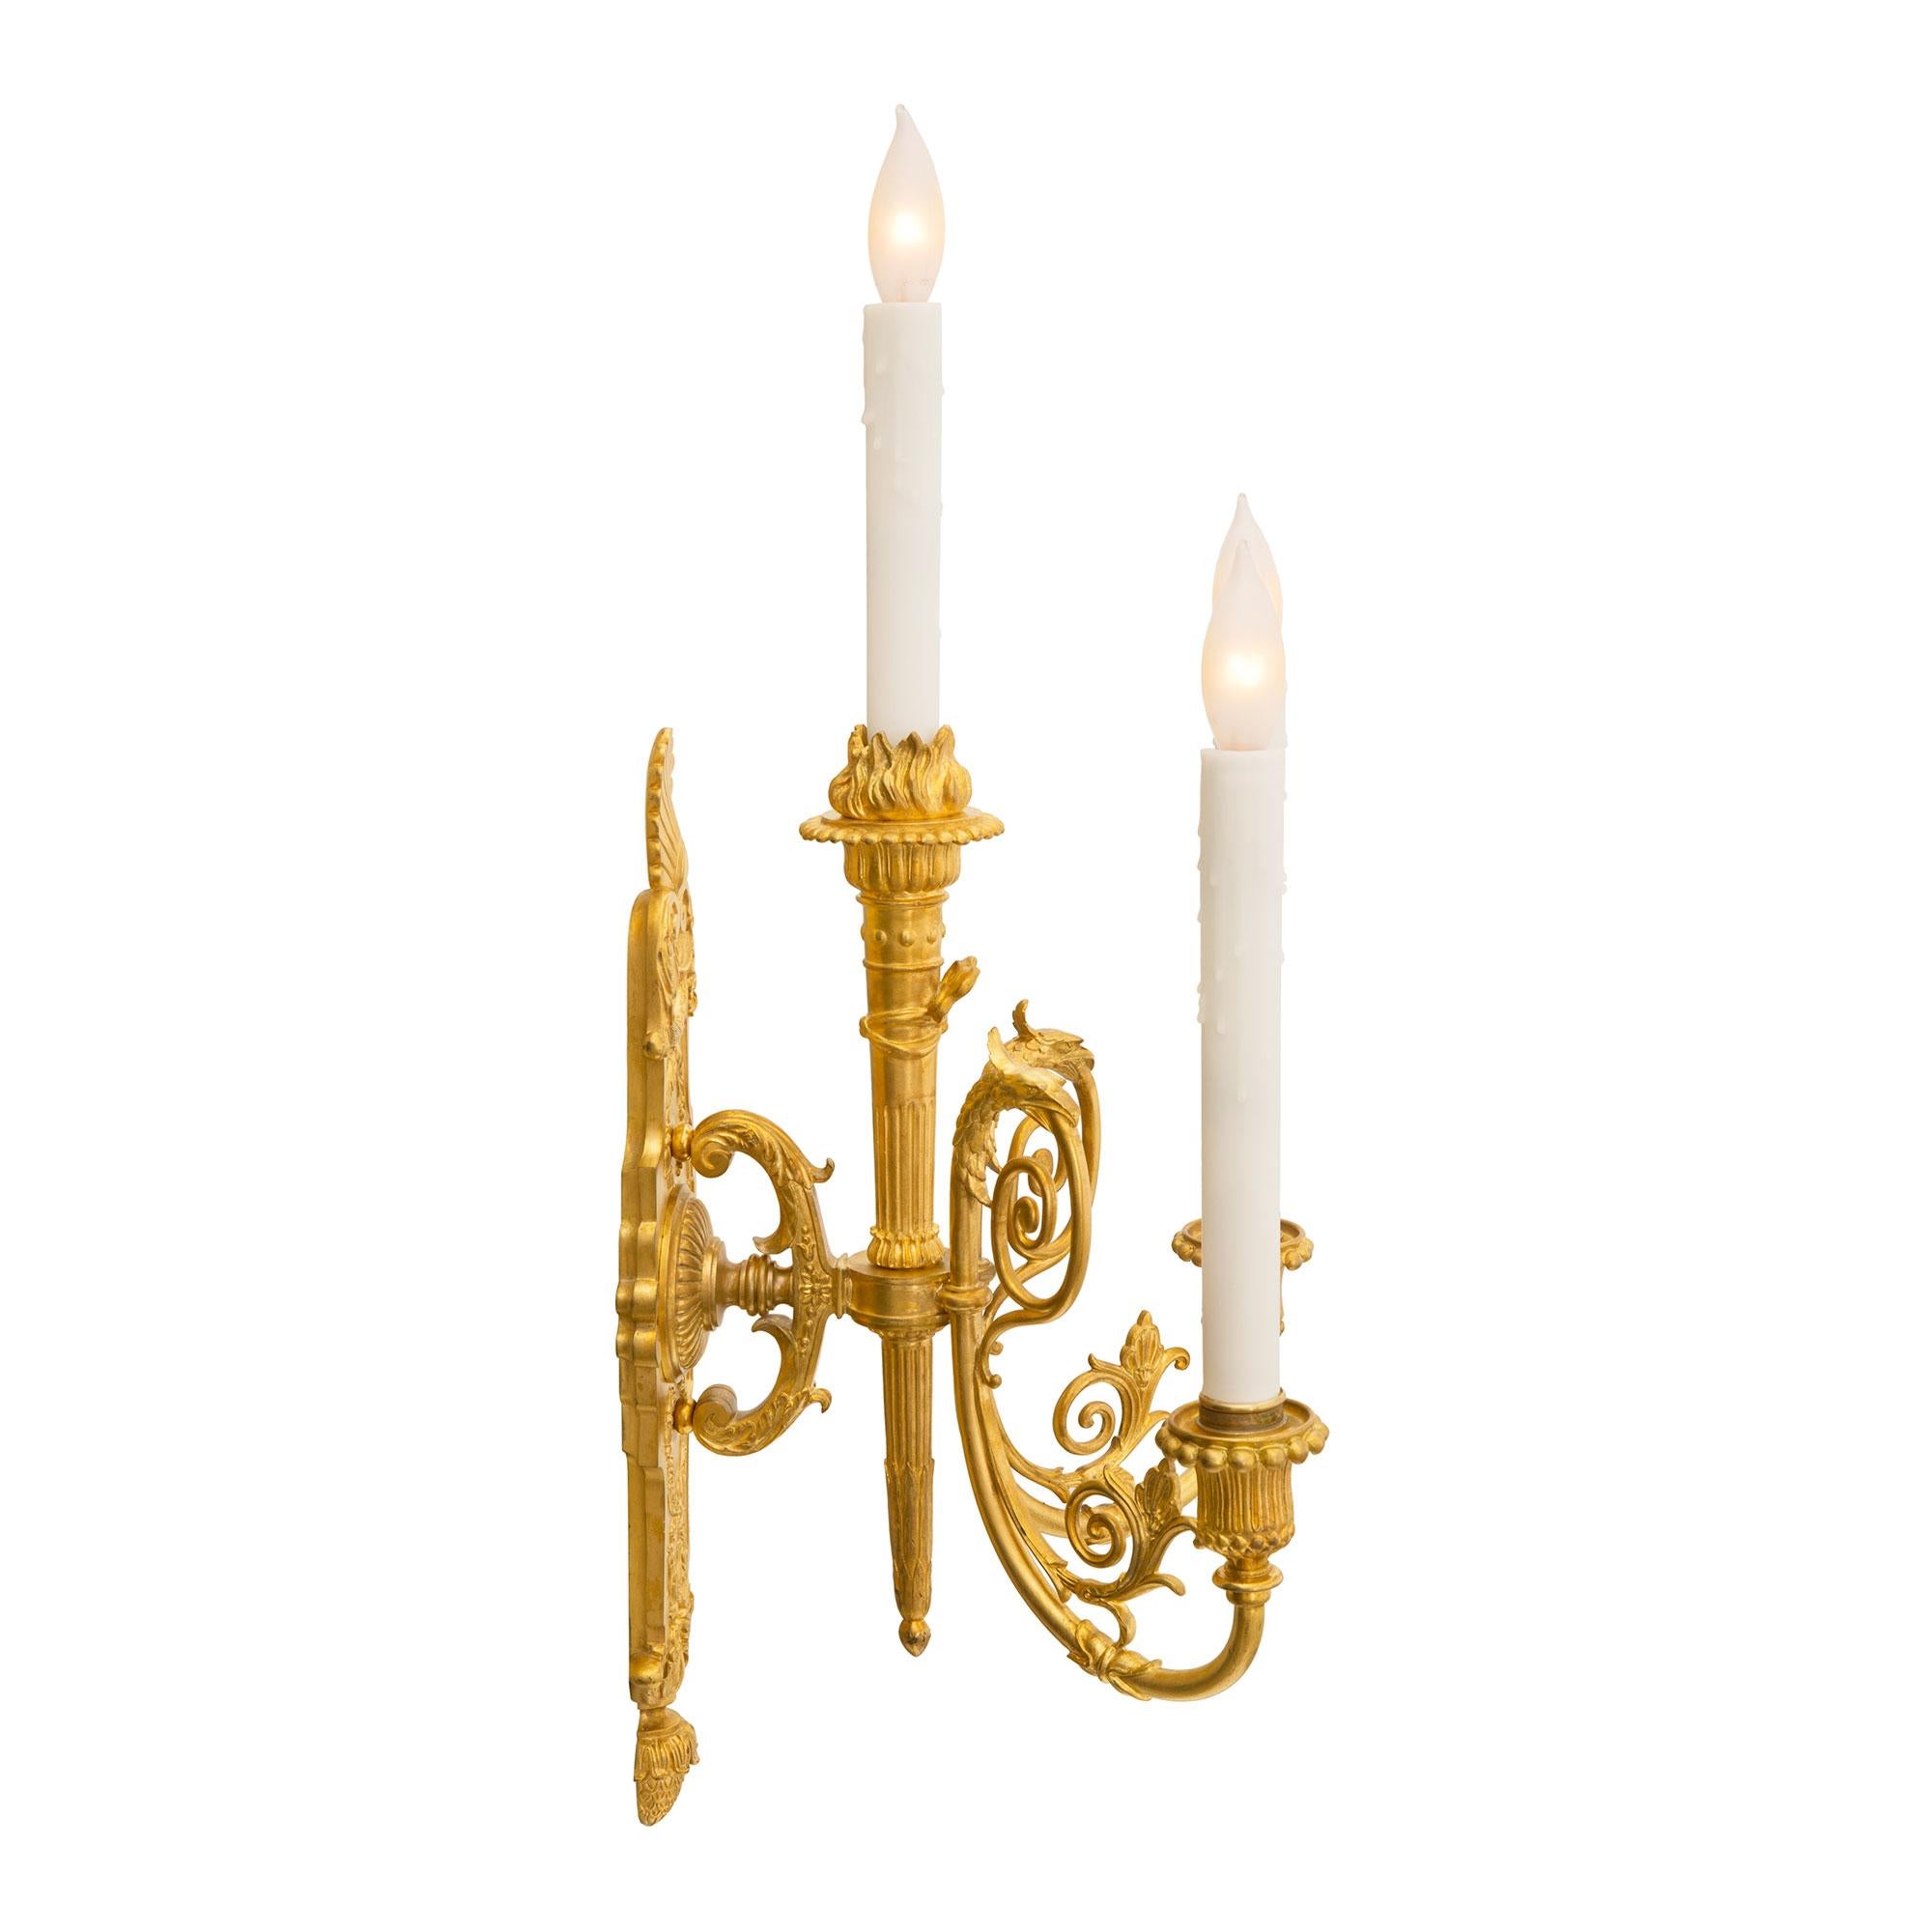 Neoclassical Pair of French 19th Century Ormolu Sconces, Signed Barbedienne